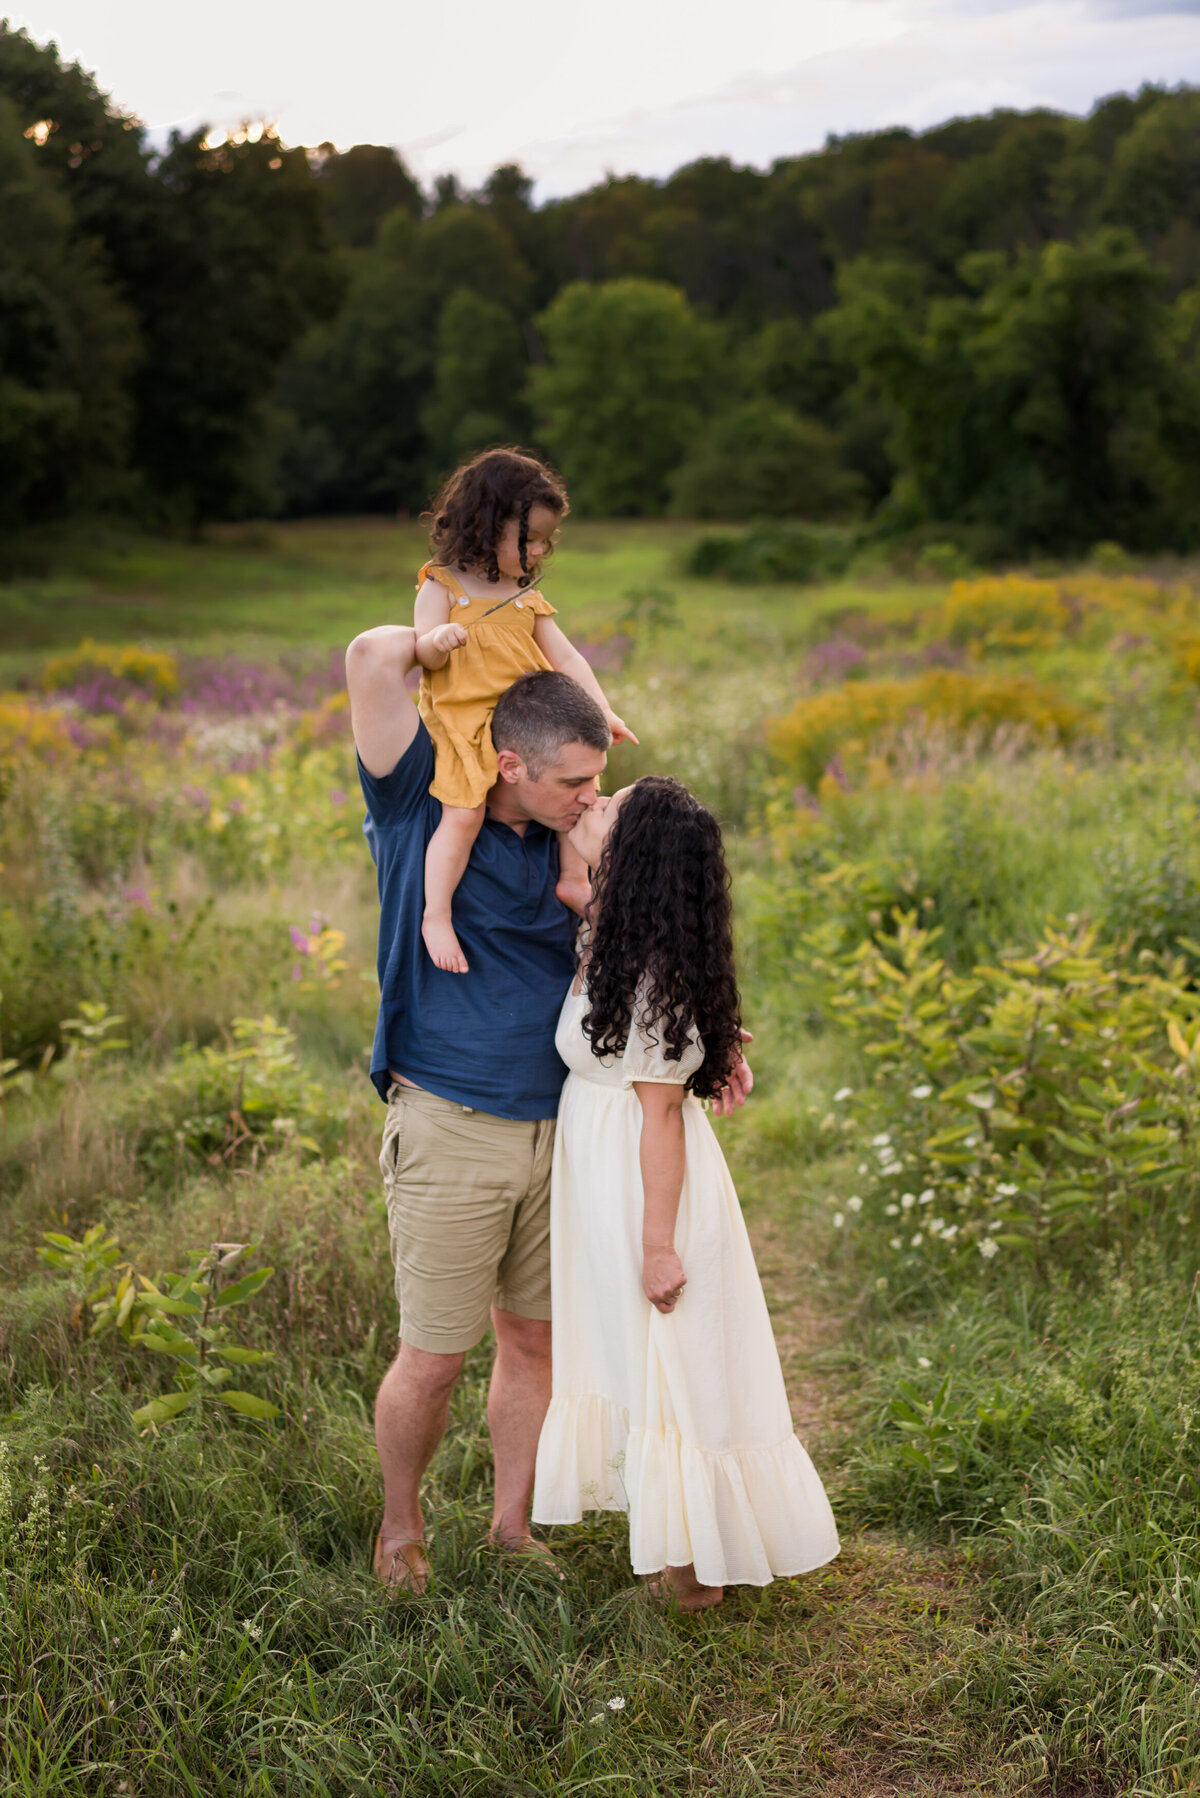 Boston-family-photographer-bella-wang-photography-Lifestyle-session-outdoor-wildflower-90